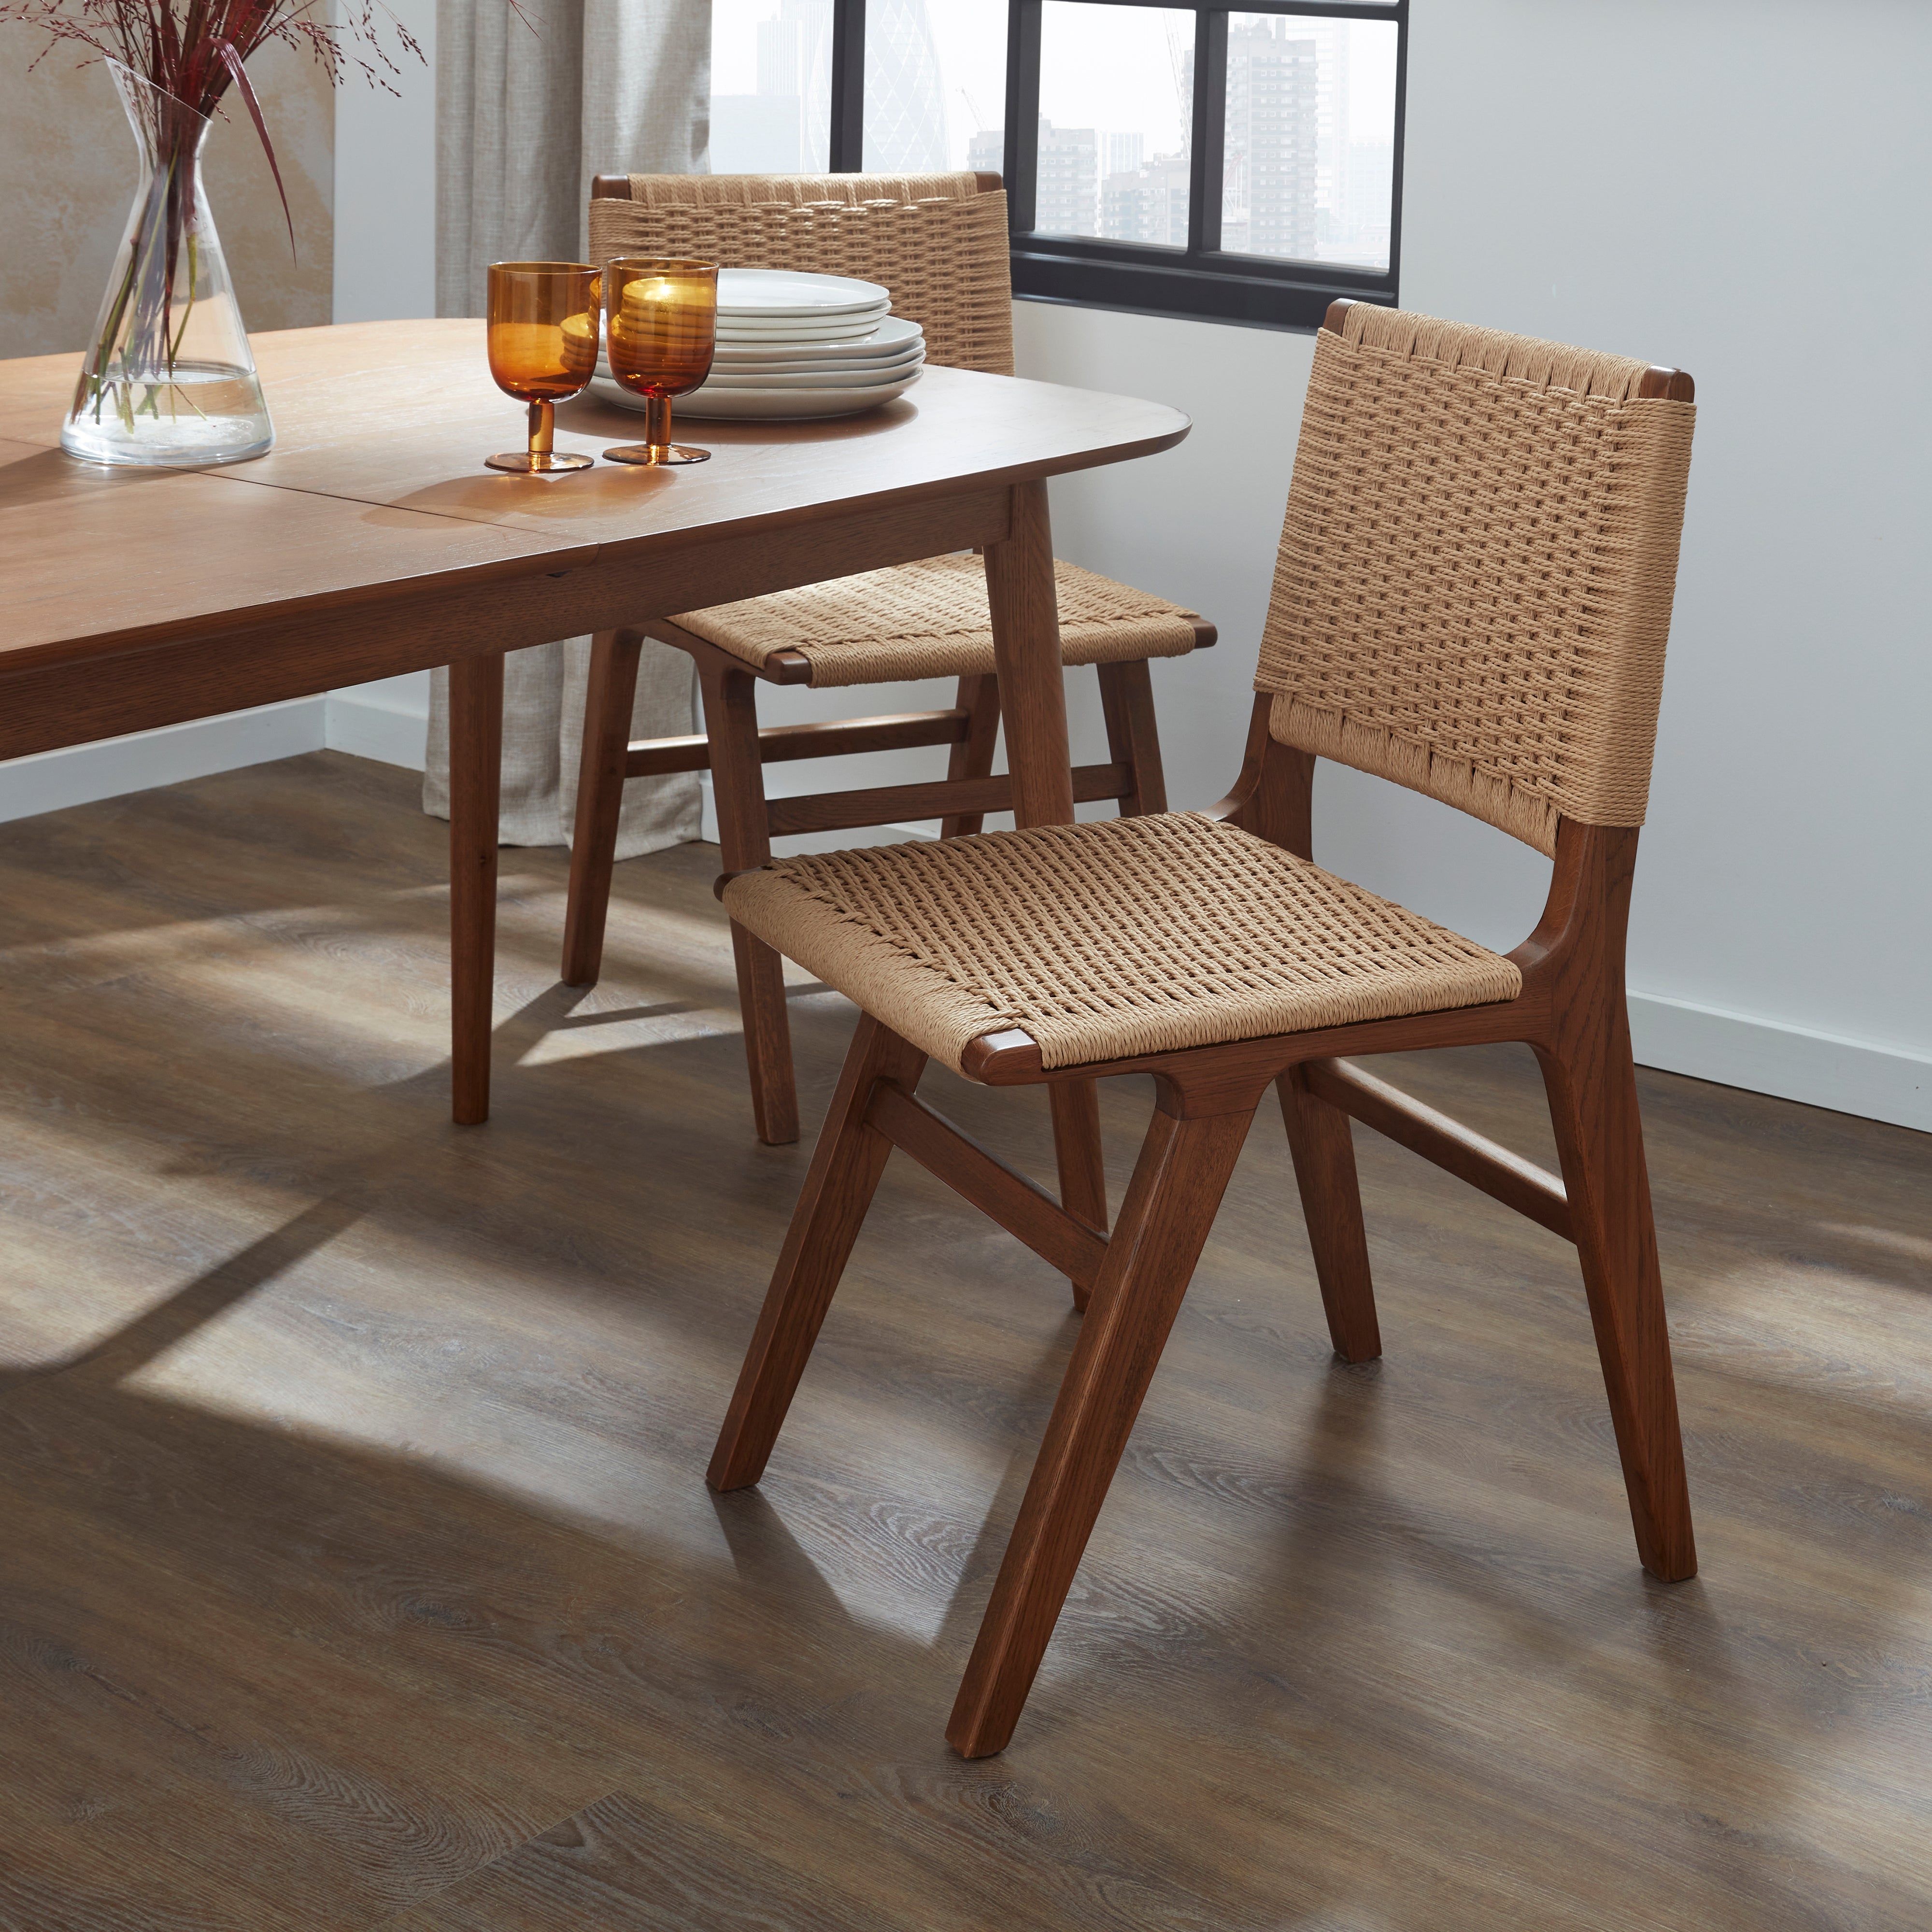 Cordella Dining Chair Oak Dark Stained Wood